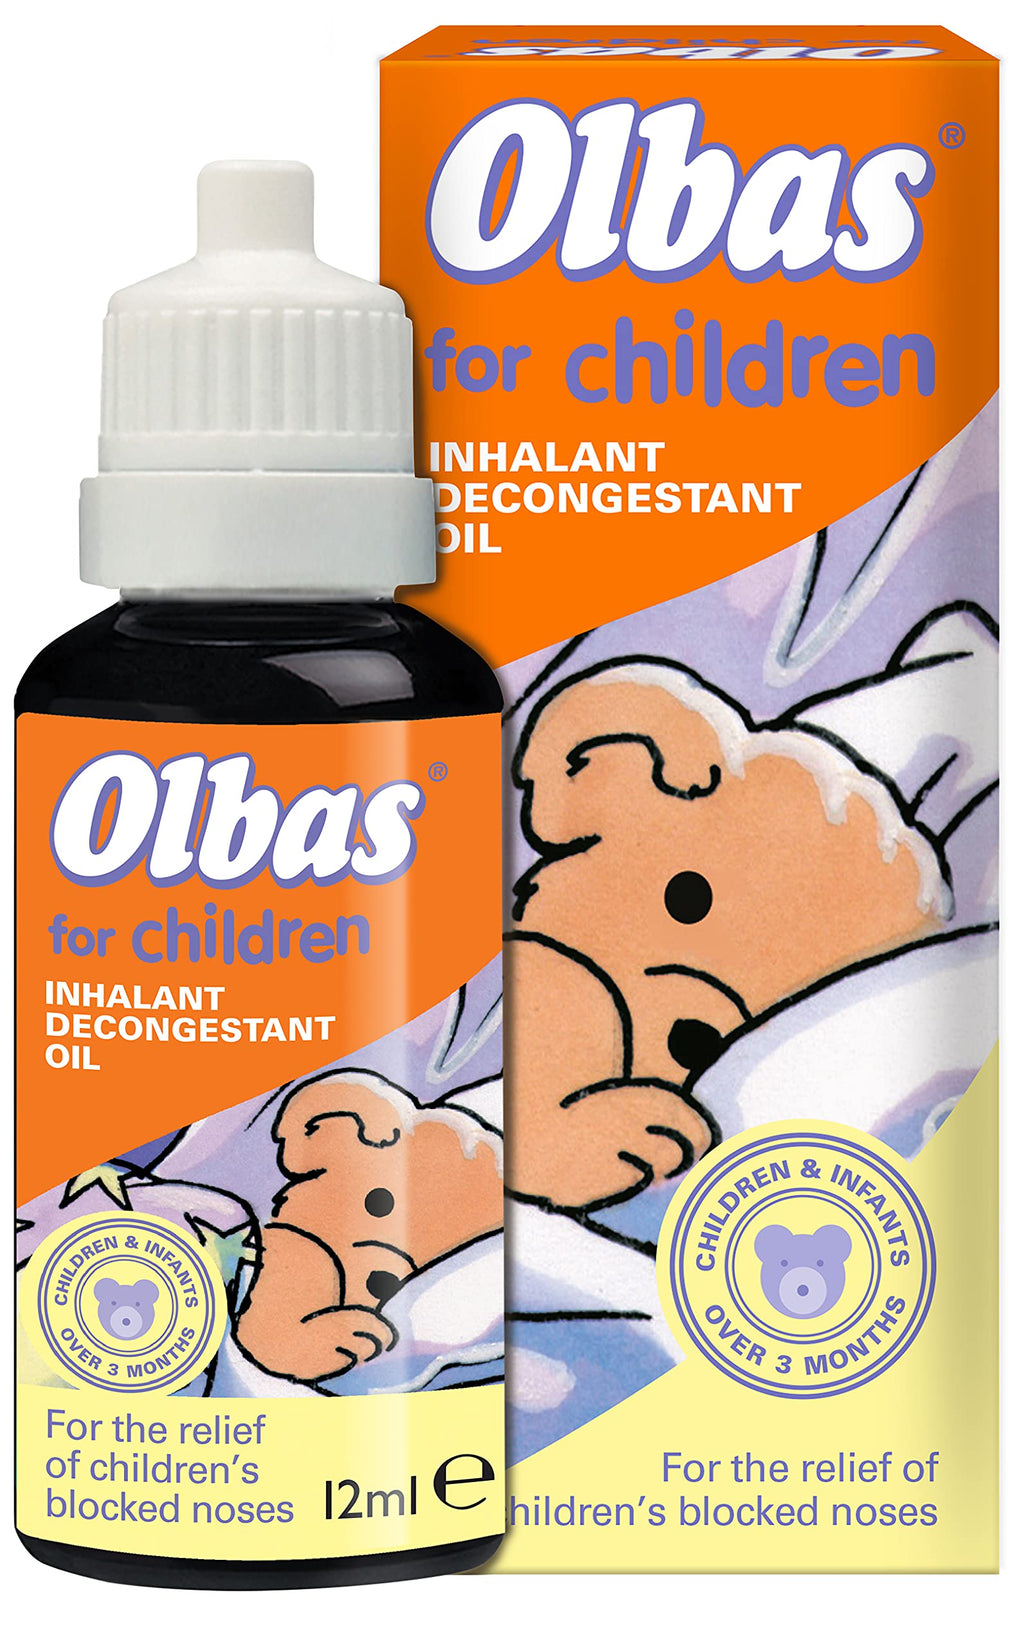 [Australia] - Olbas Oil For Children 12ml - Inhalant Decongestant Oil - Relief from Catarrh, Colds & Blocked Sinuses - For Children over 3 Months Old 